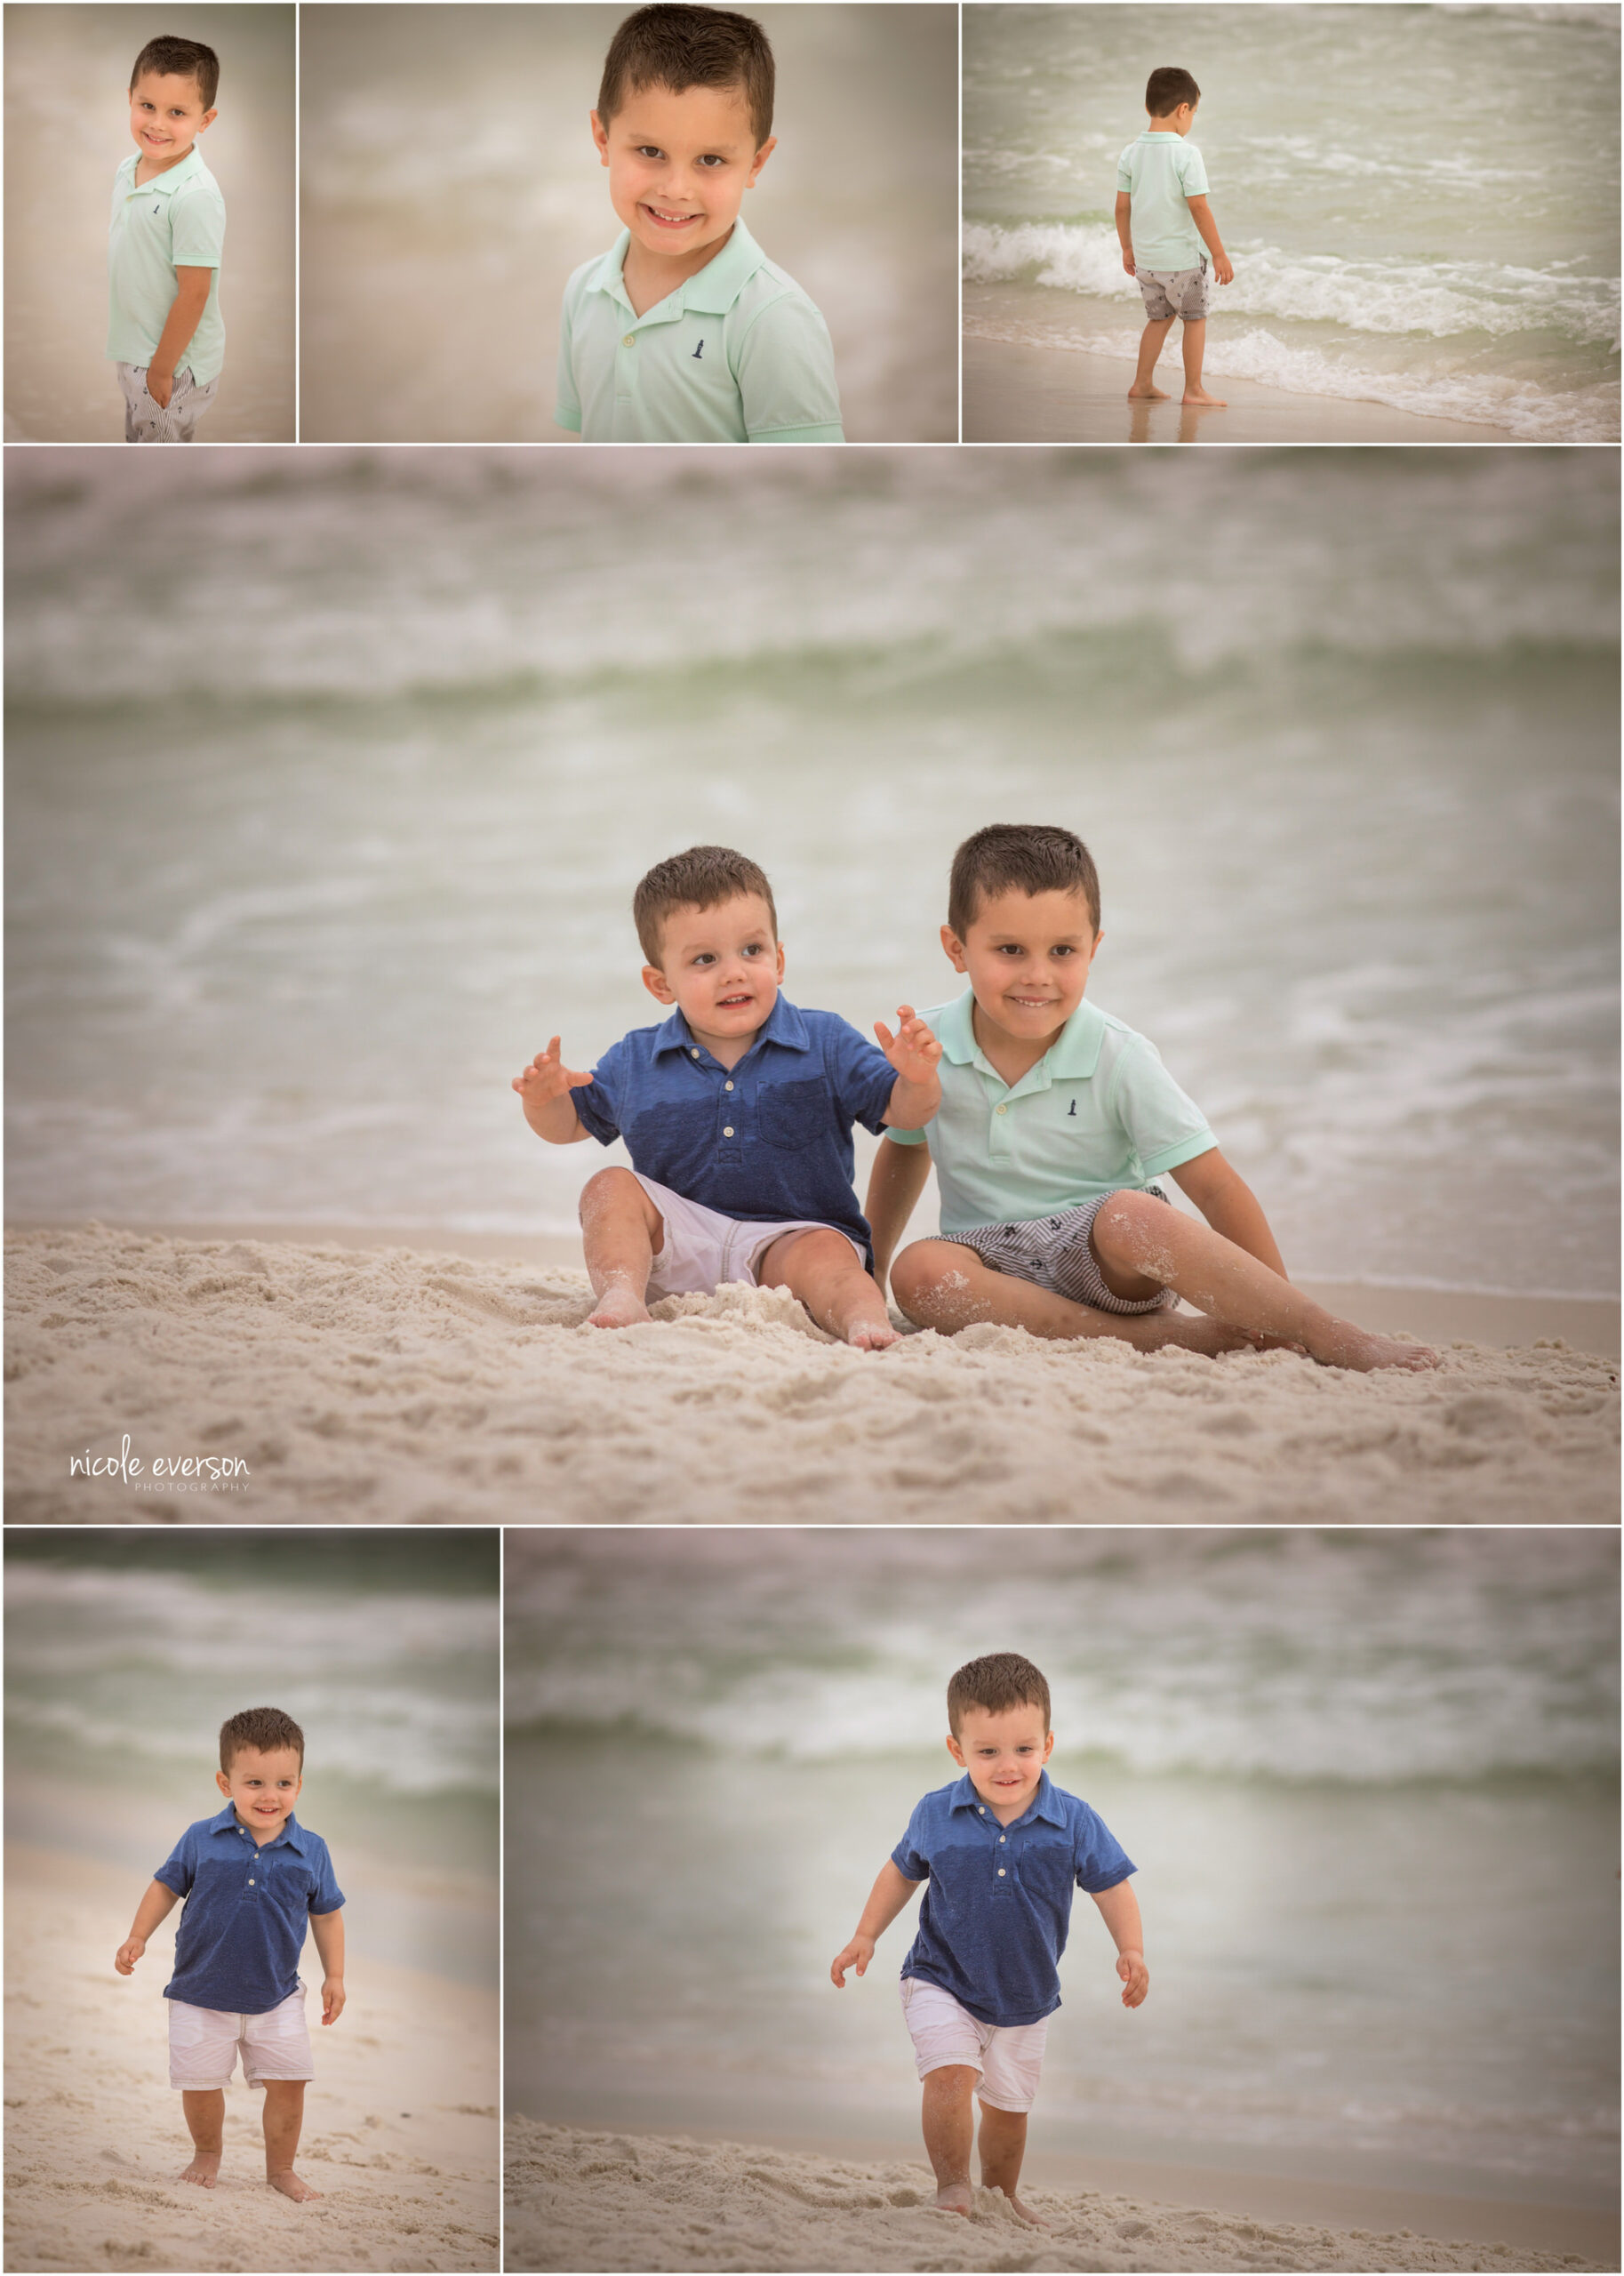 two young kids playing on the beach